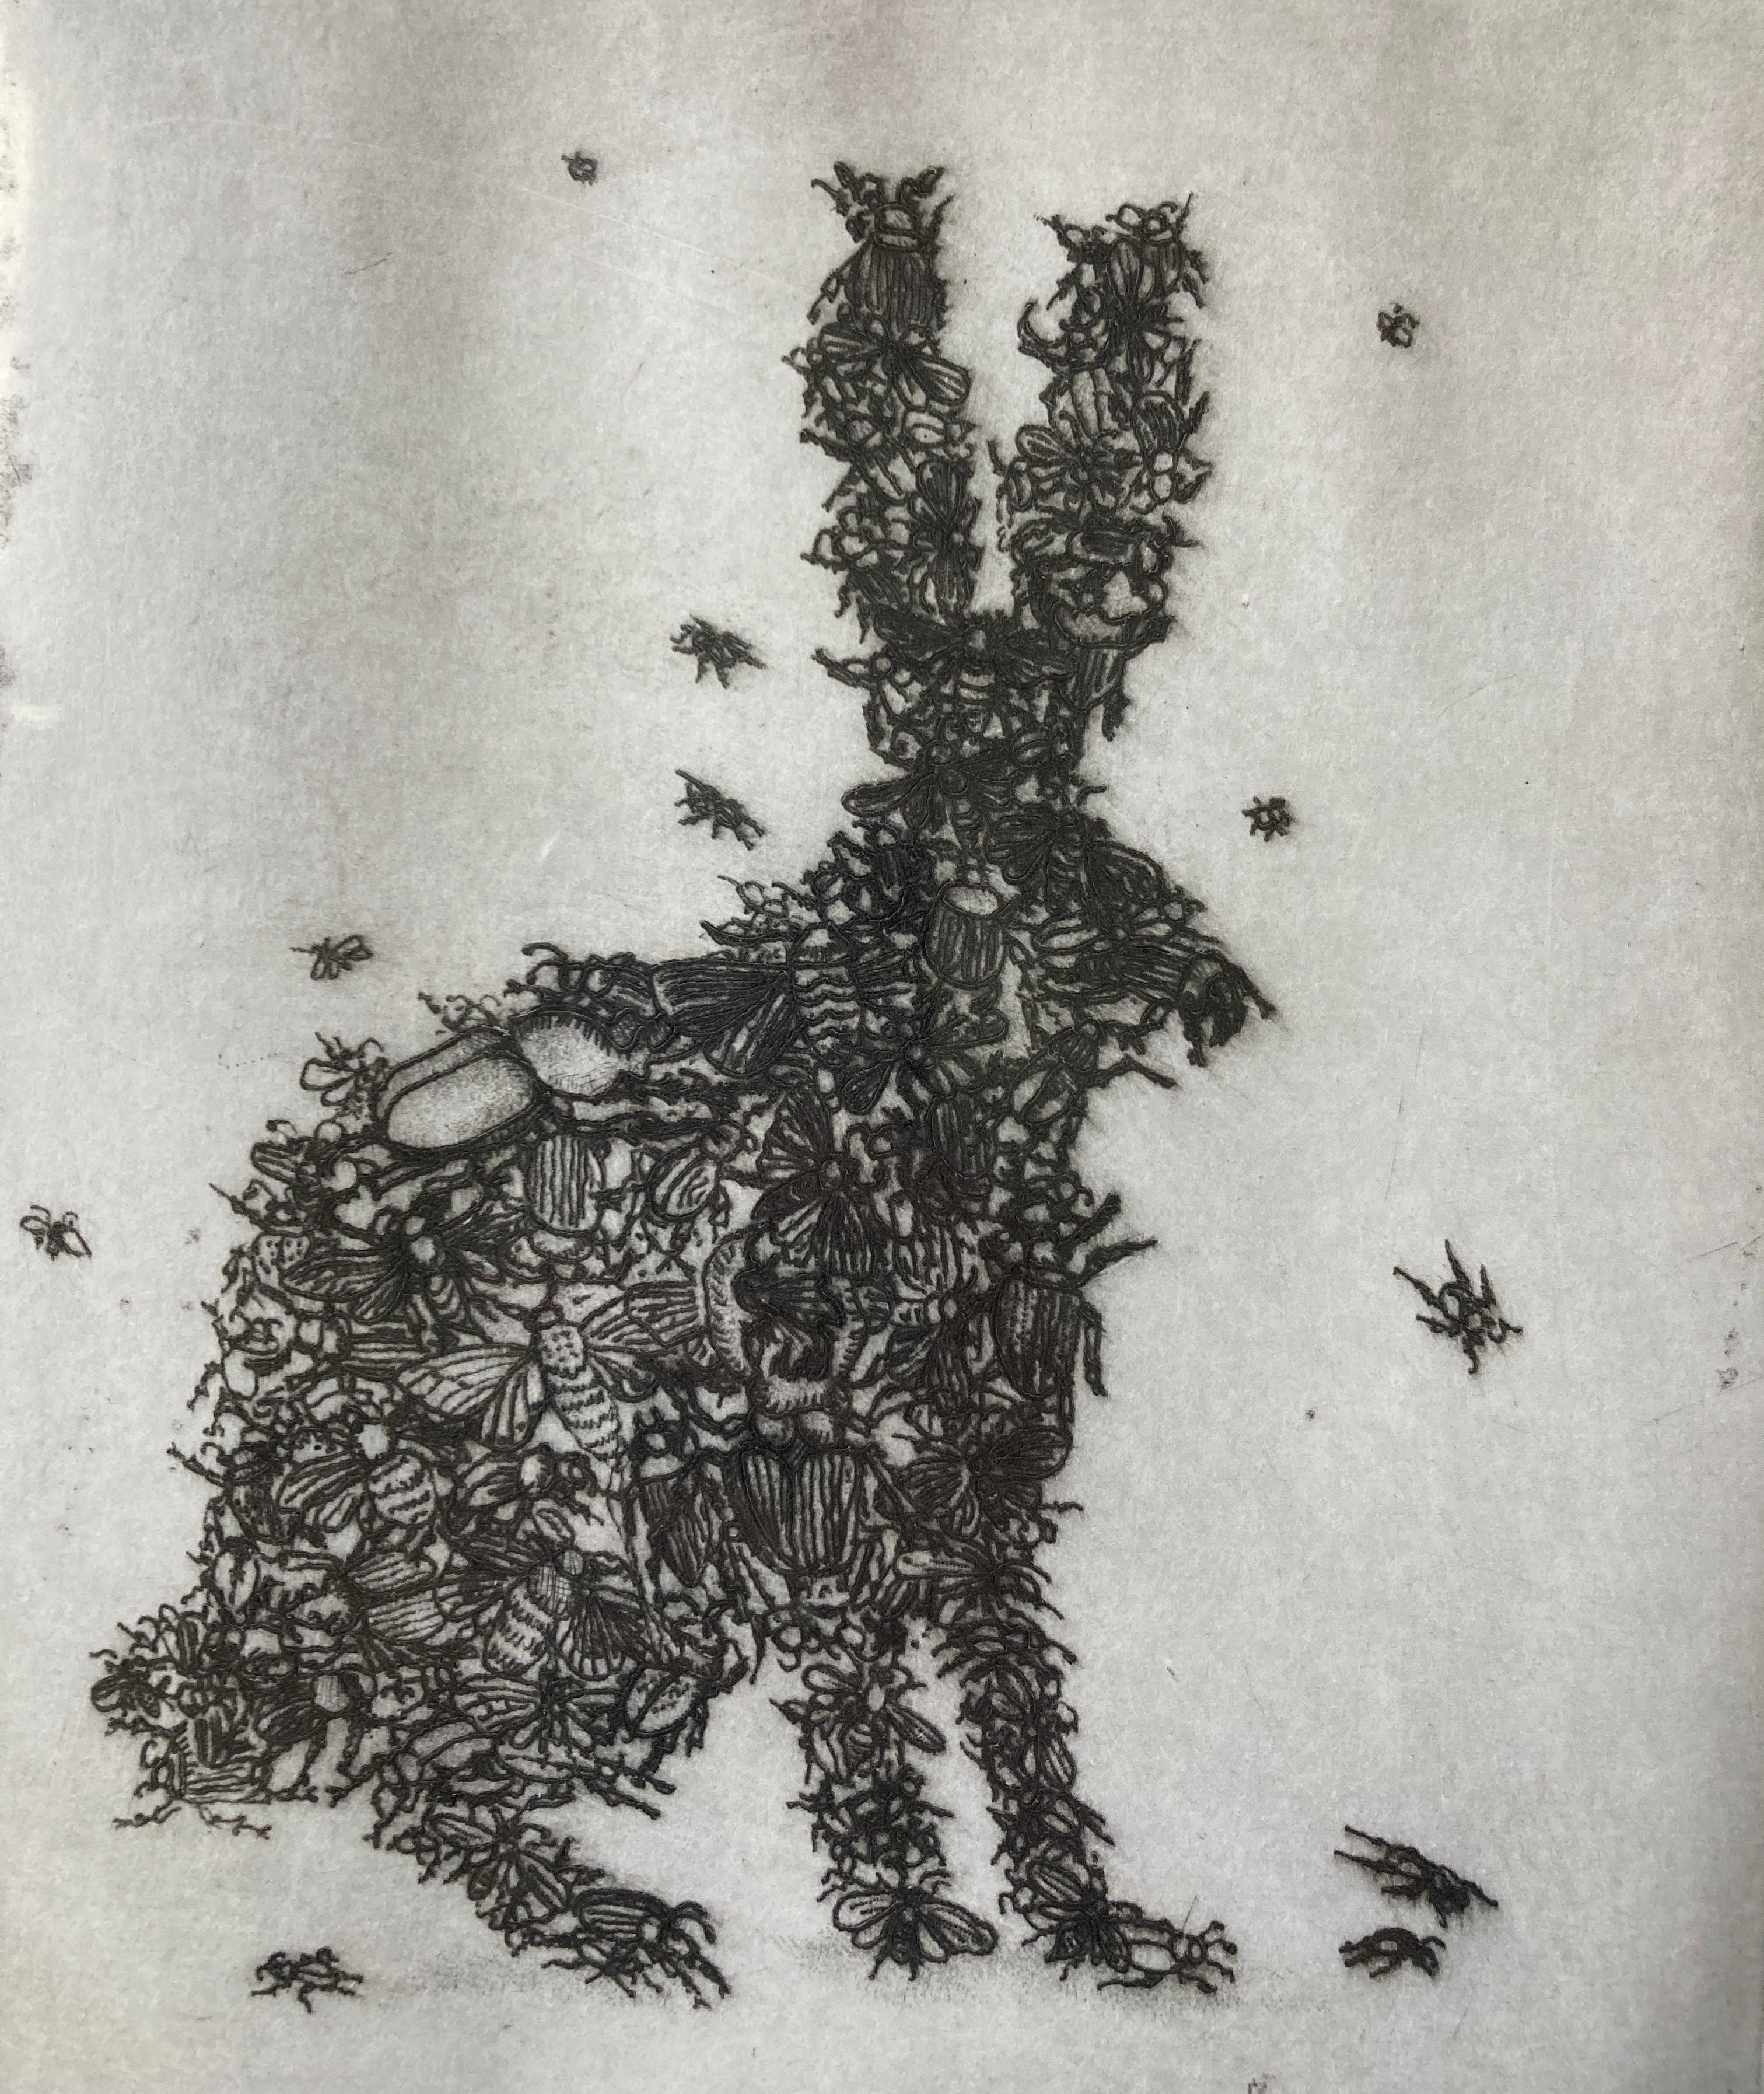 David Gilhooly 'Bugs' Artist's Proof Signed Etching Print For Sale 1